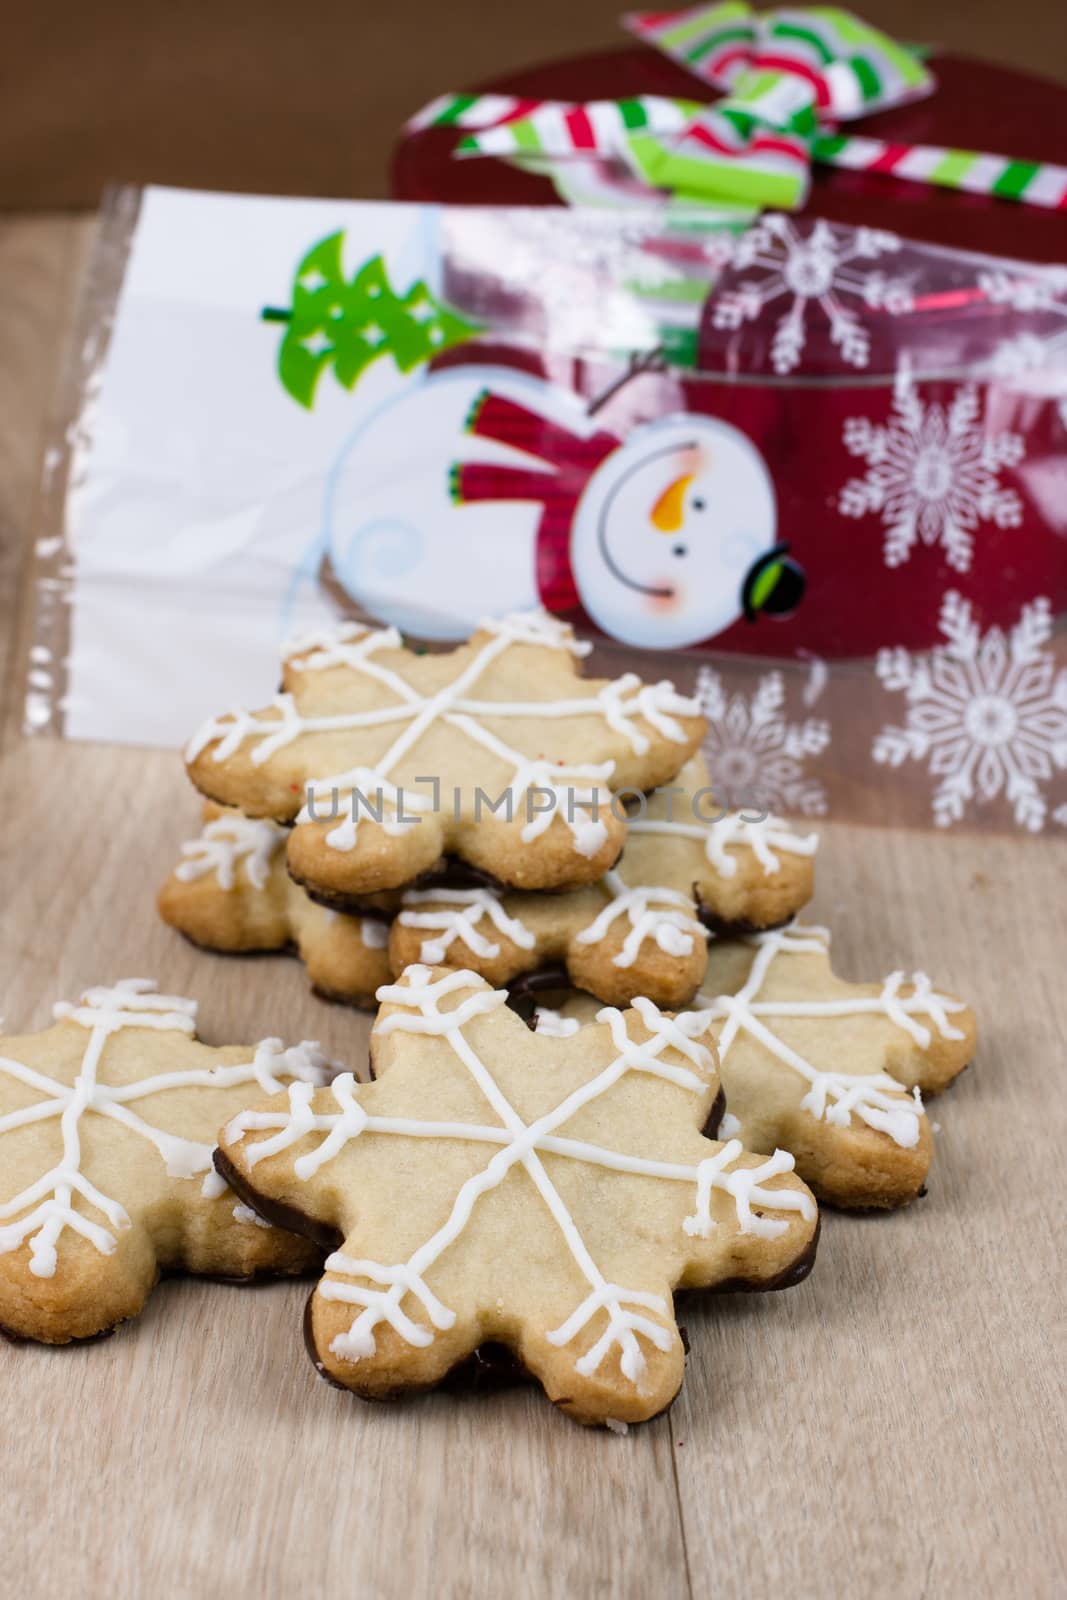 Snowflake shaped shortbreat cookies with chocolate dipped bottoms and icing on top.